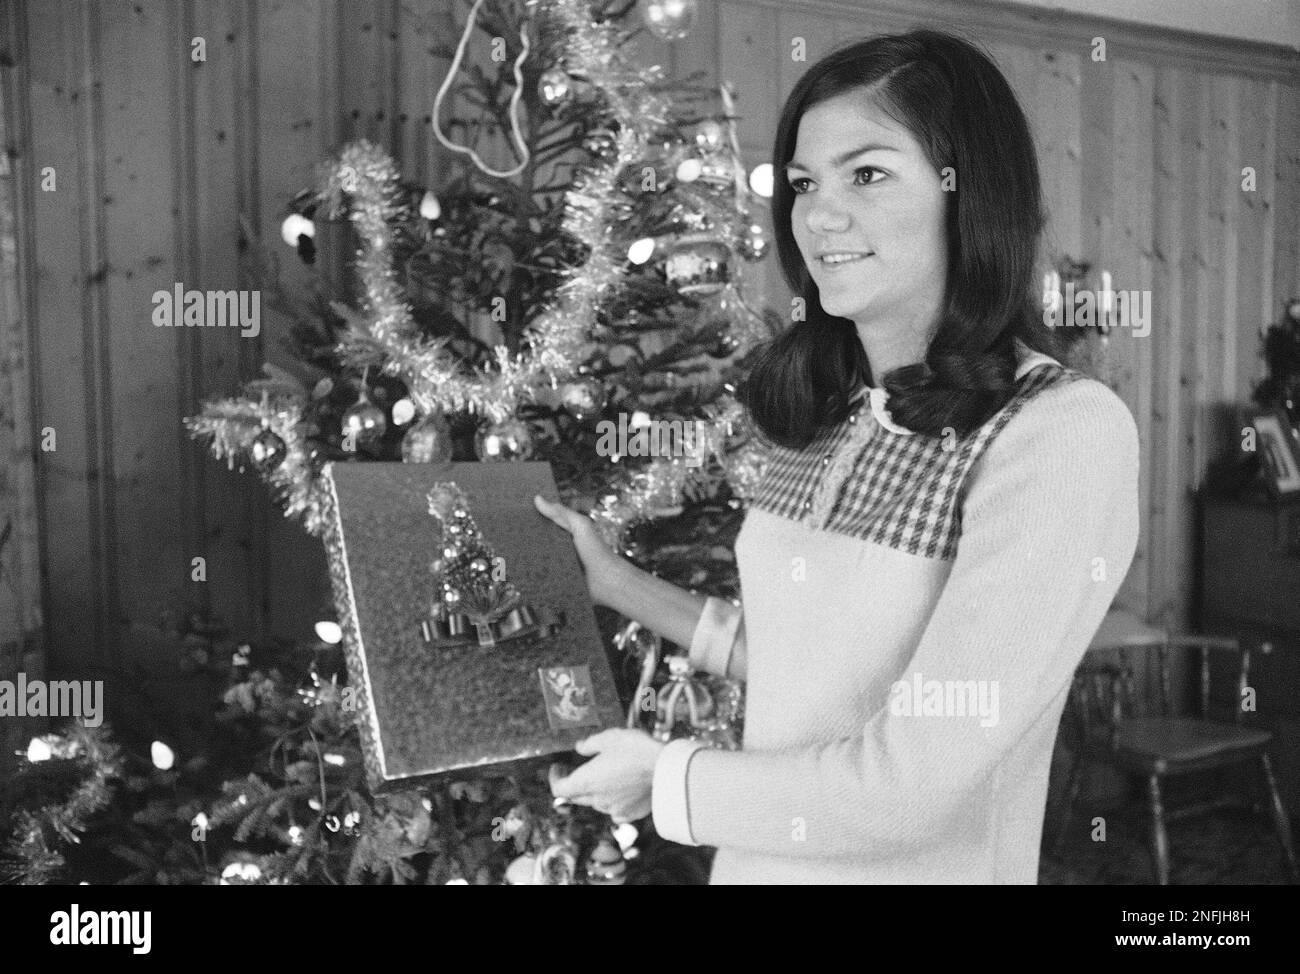 Barbara Jane Mackle trims the Christmas tree at her home in Miami, Dec